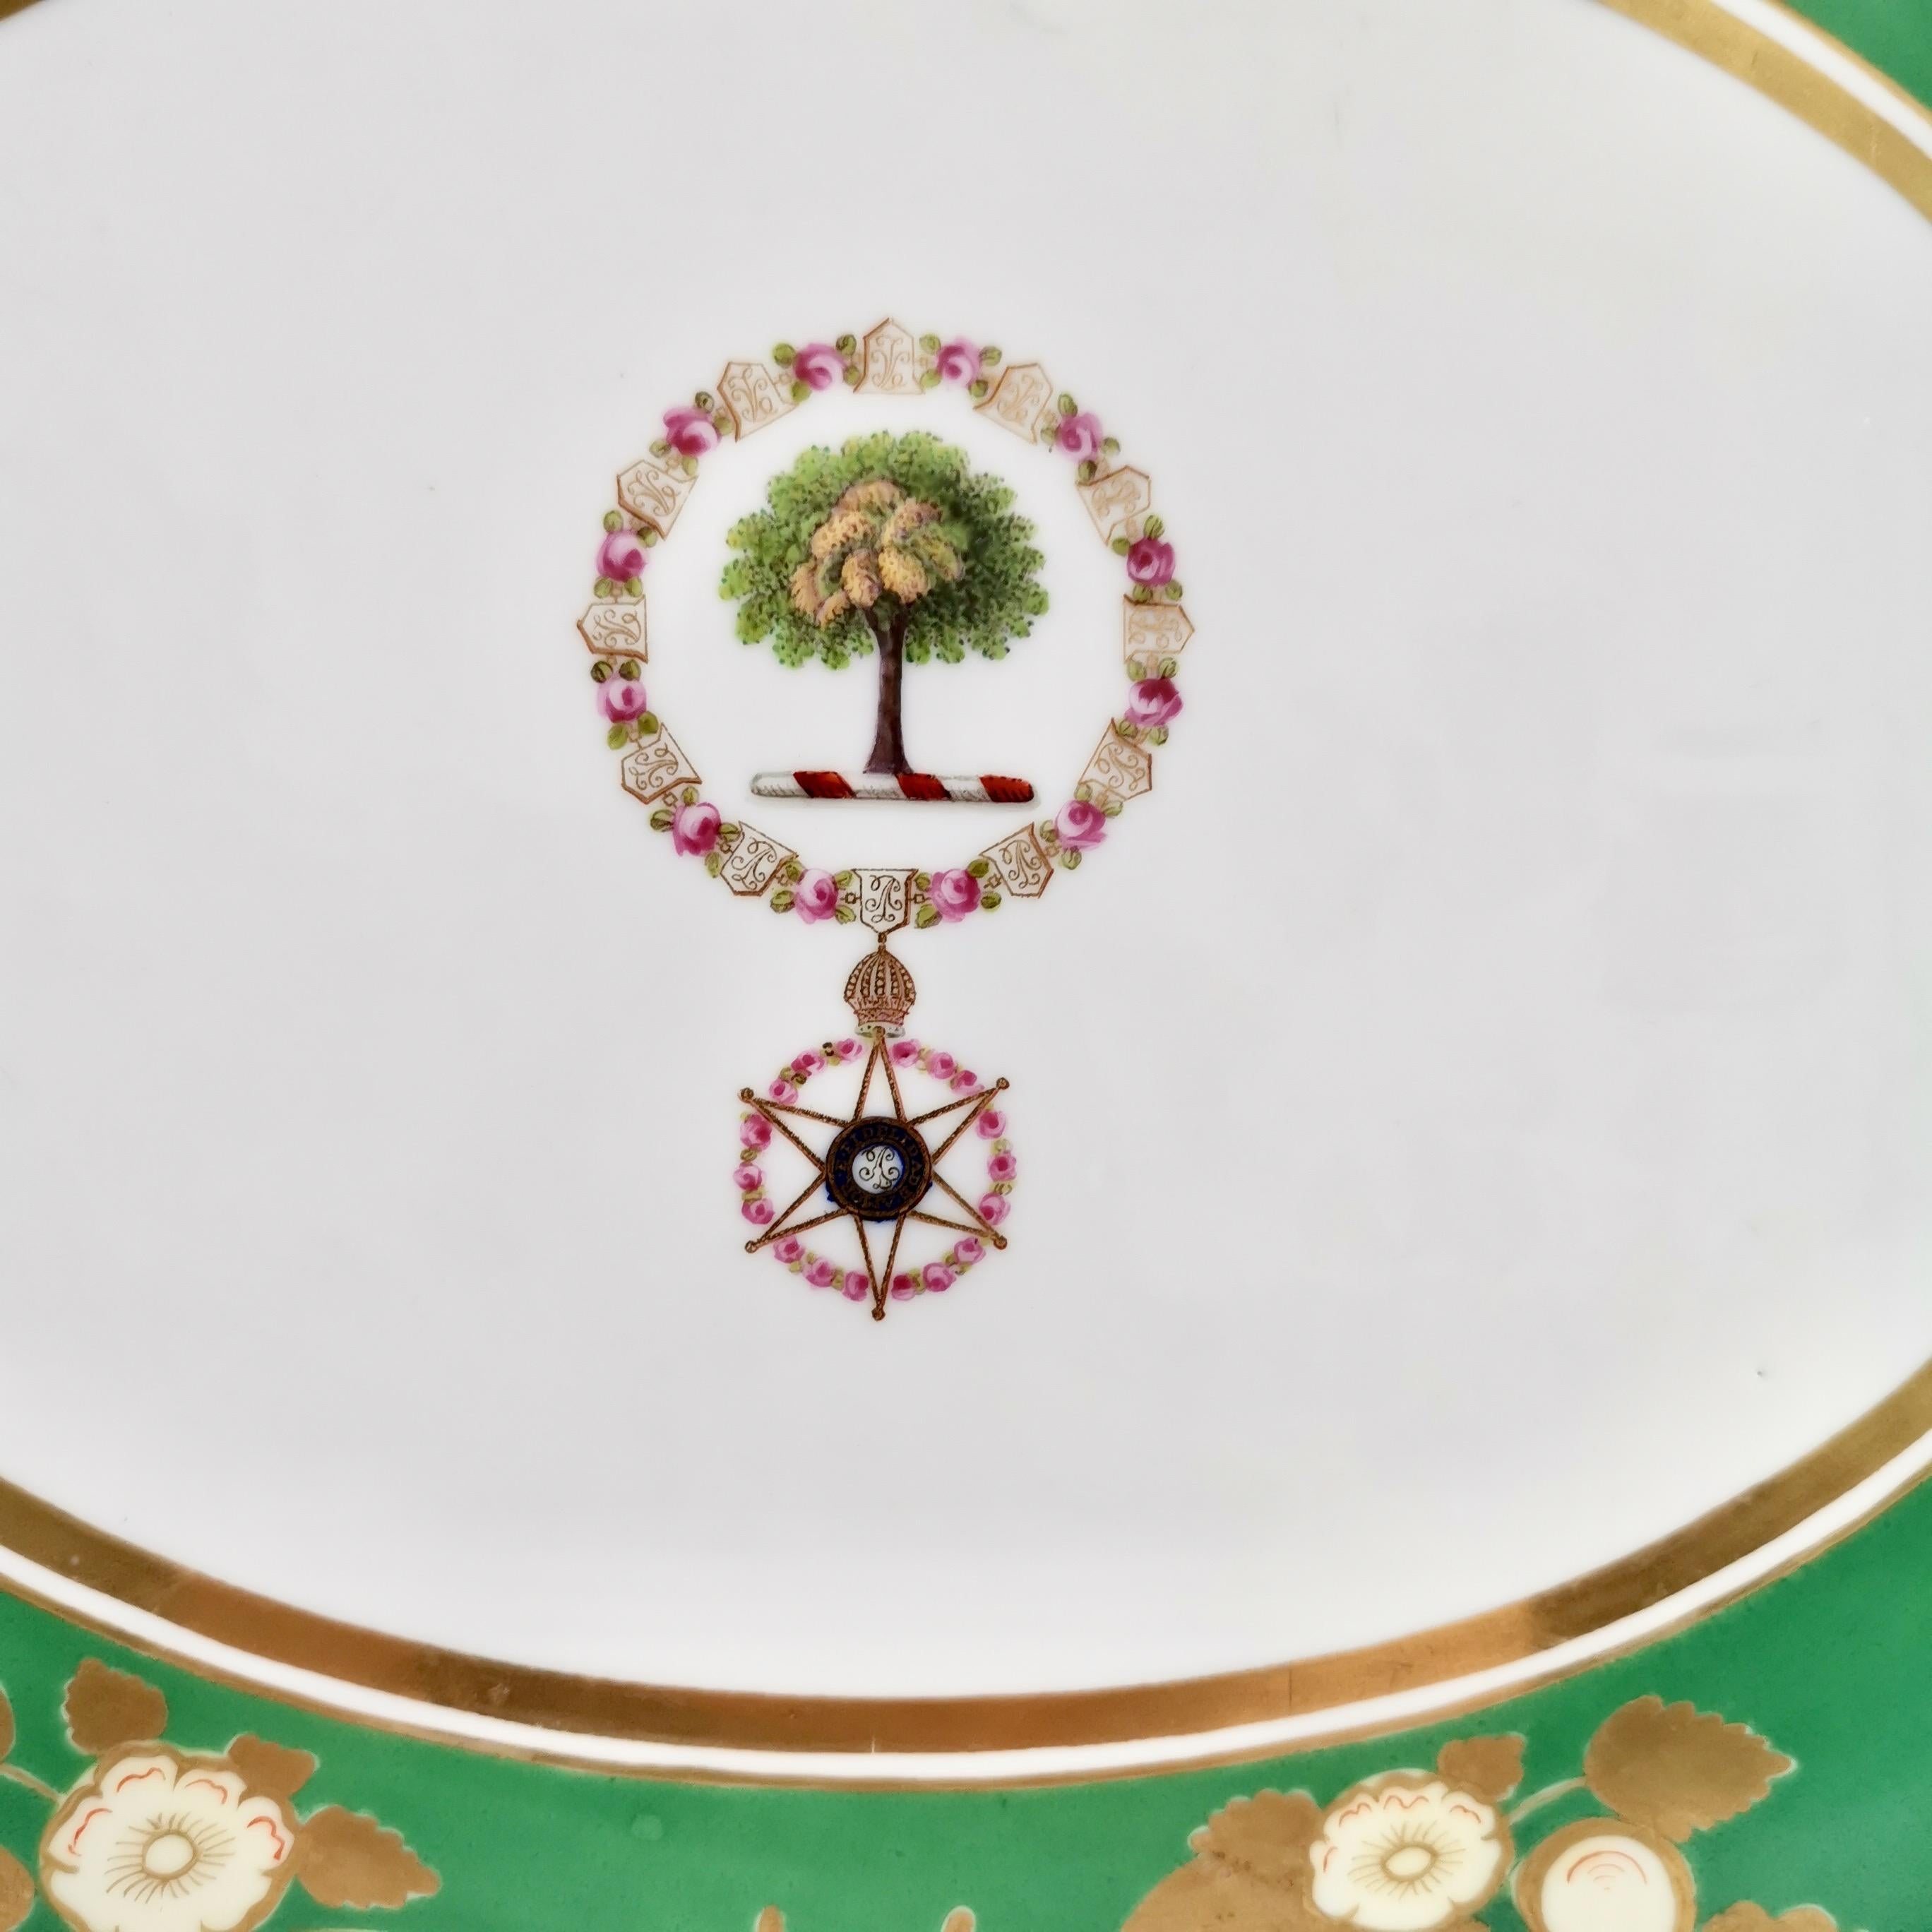 This is a historically important meat platter made by Chamberlain's Worcester between 1829 and 1837. It has an emerald green ground with floral reserves and the Collar and Medallion of the Brazilian Imperial Order of the Rose with the motto 